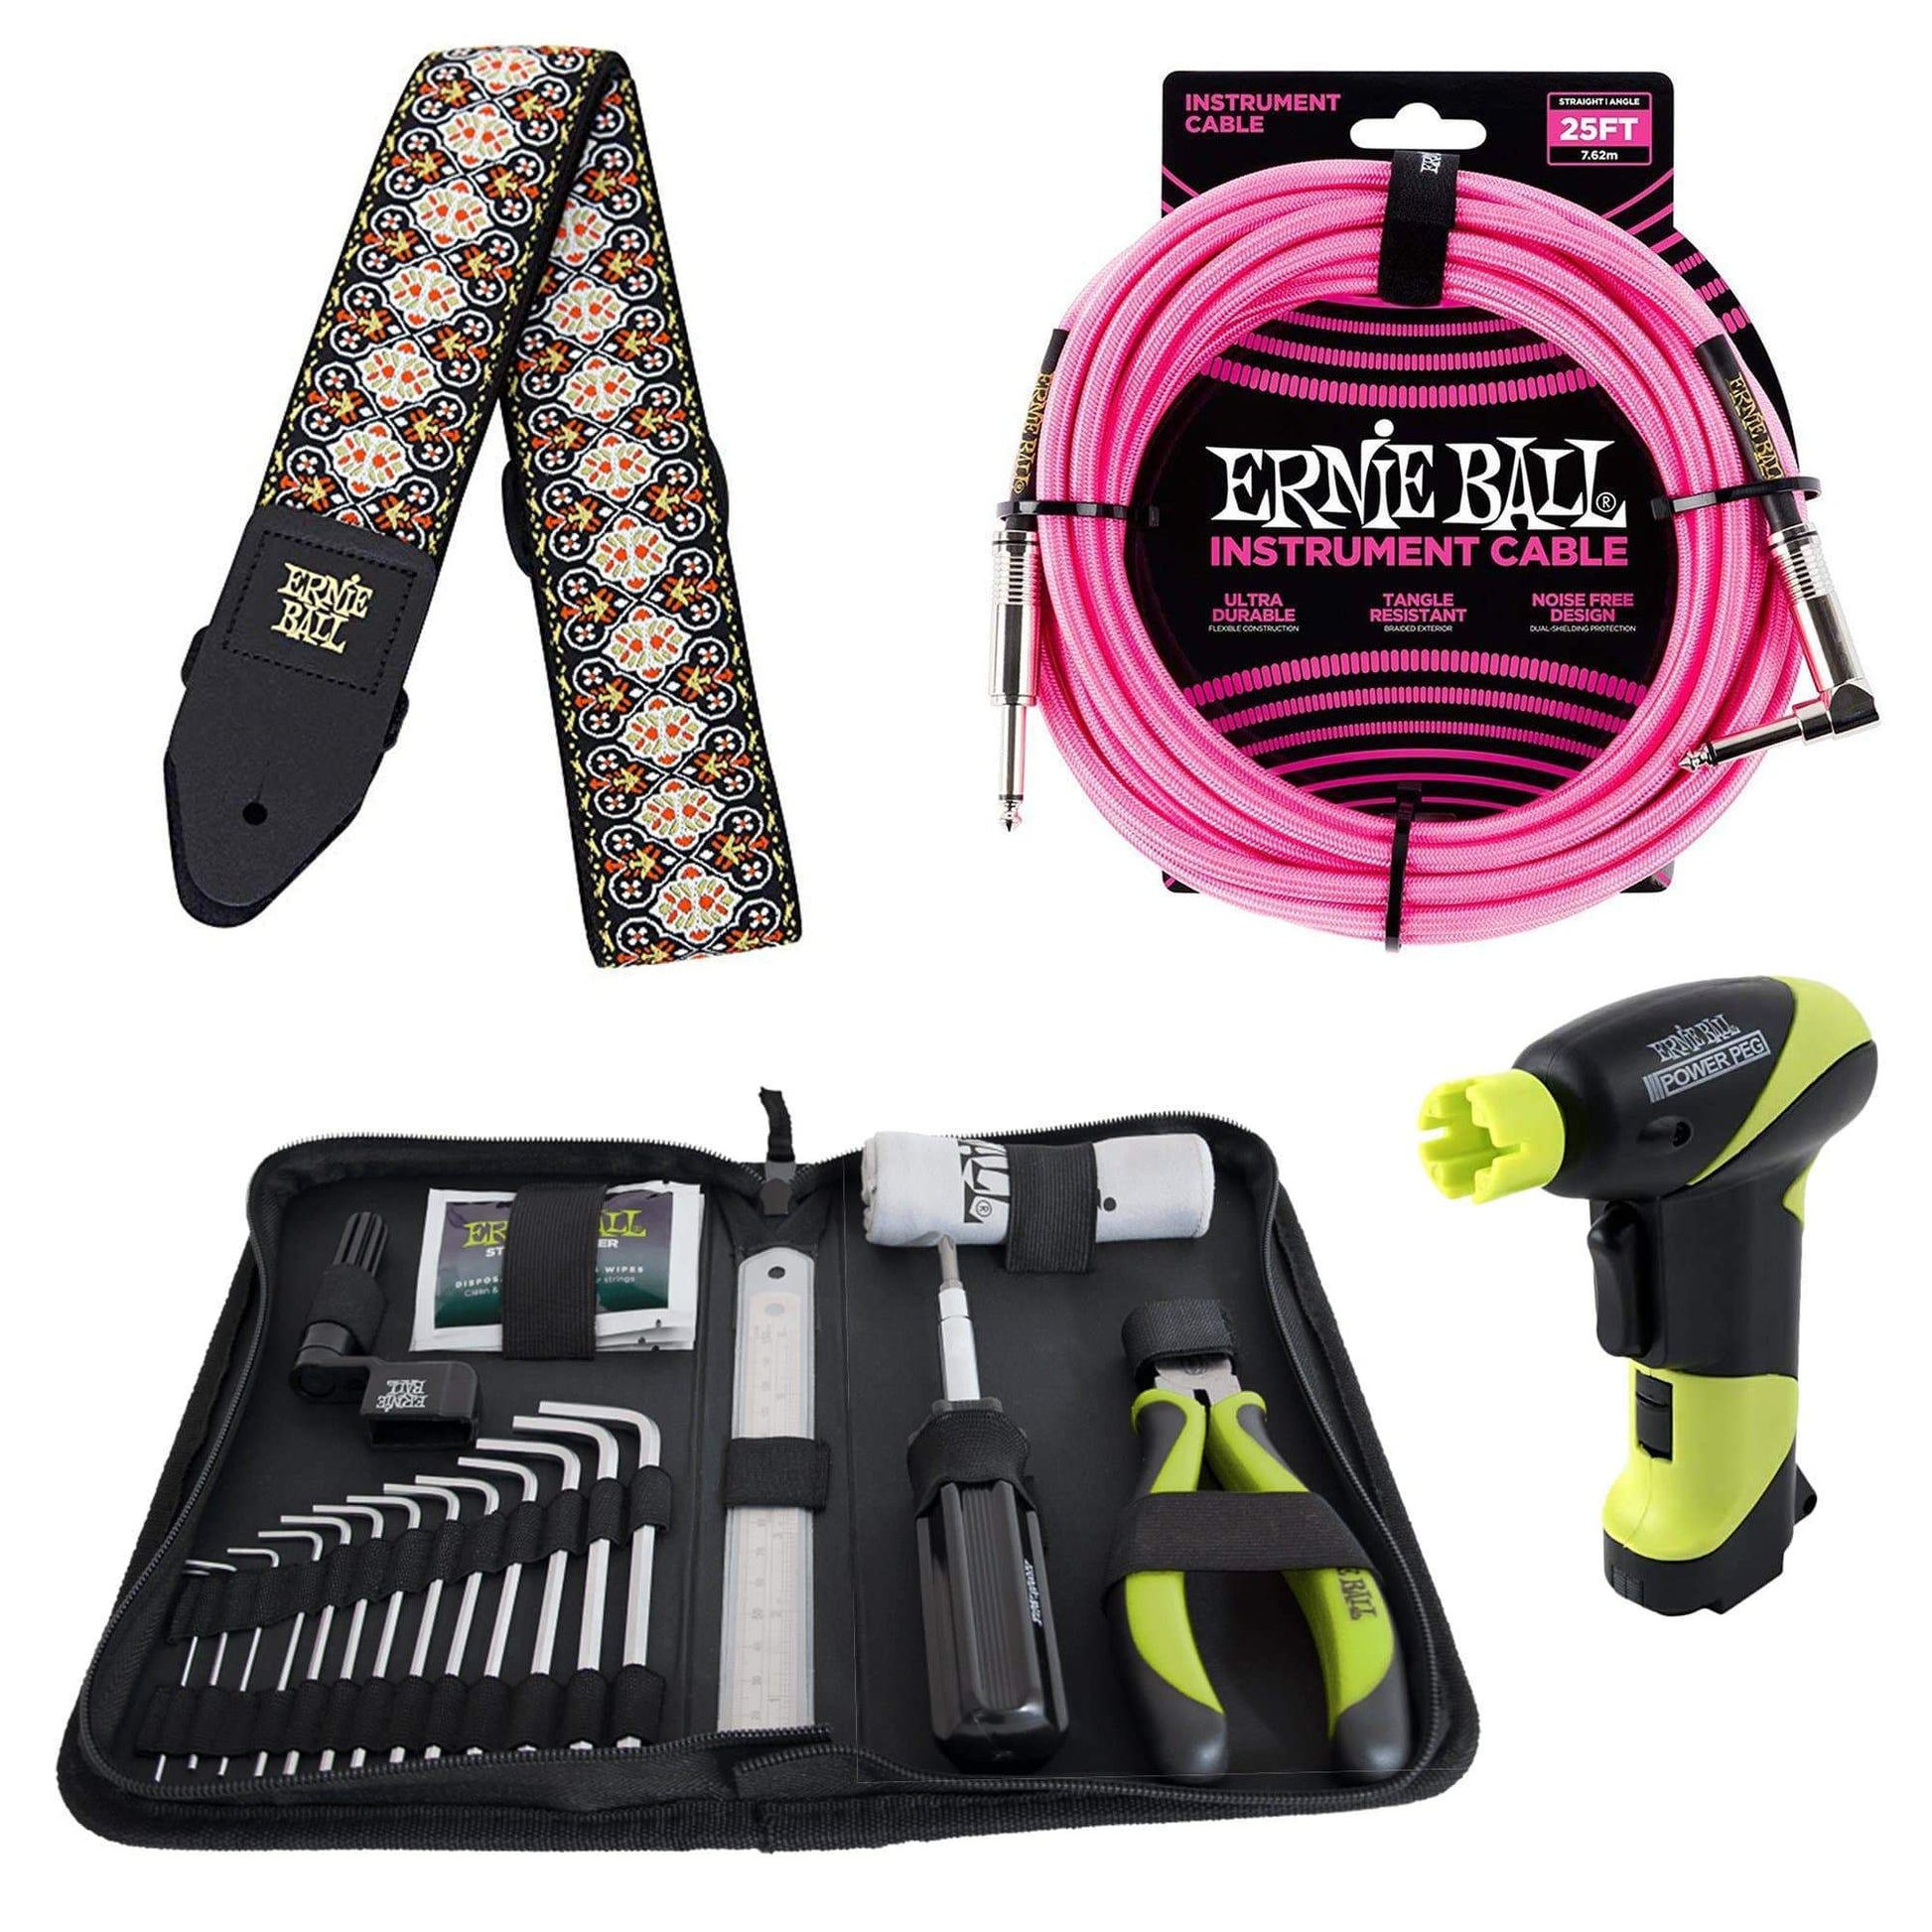 Ernie Ball 4114 Musician's Tool Kit, Power Peg, Jacquard Strap and Braided Cable Bundle #5 Accessories / Tools